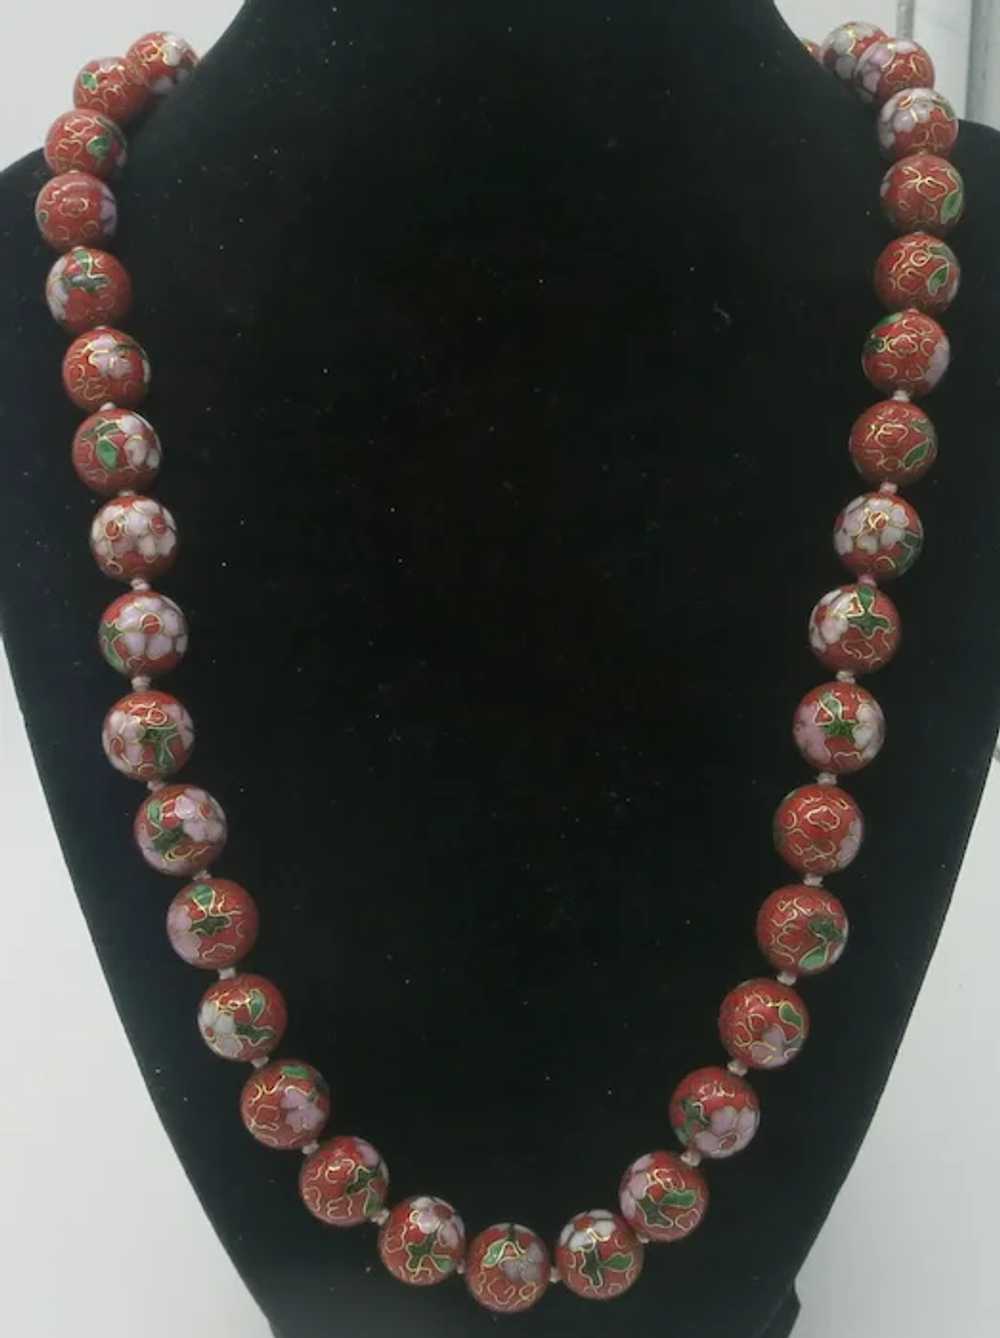 Red Cloisonne Chinese Bead Necklace 22" - image 4